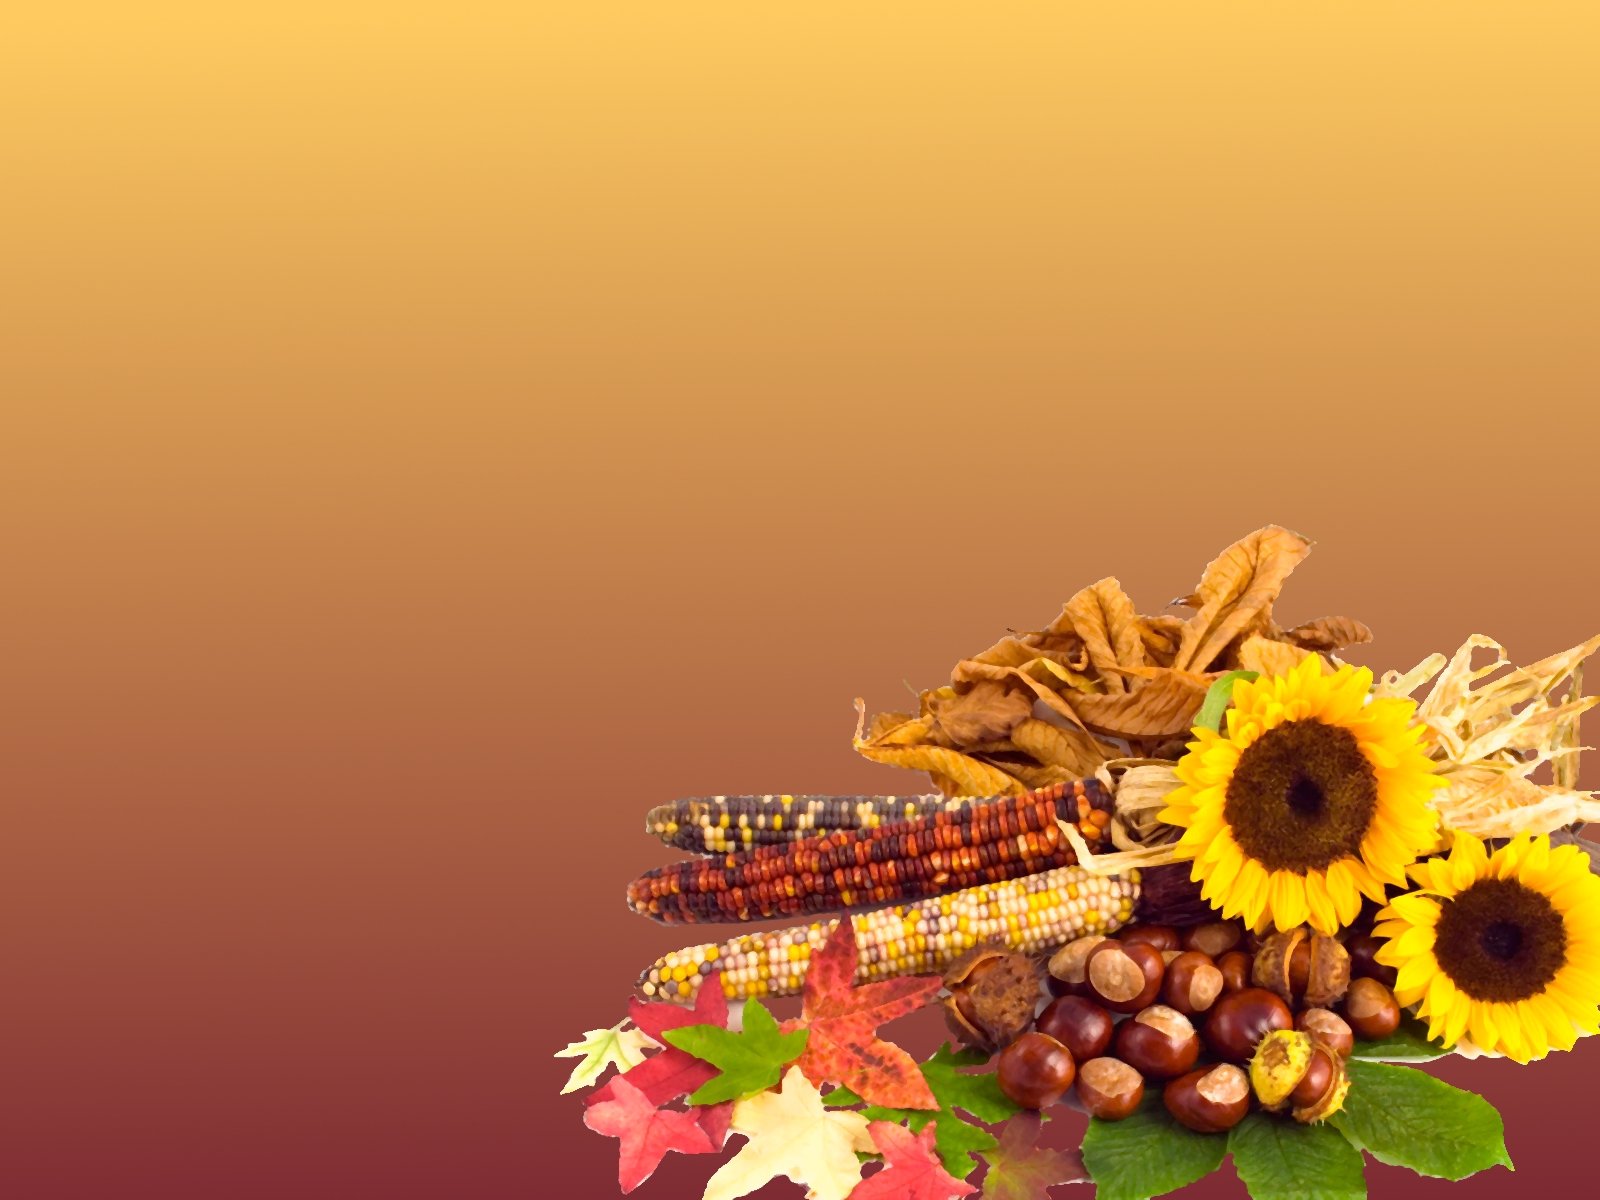  Saw I Learned I Share Free Thanksgiving PowerPoint Backgrounds